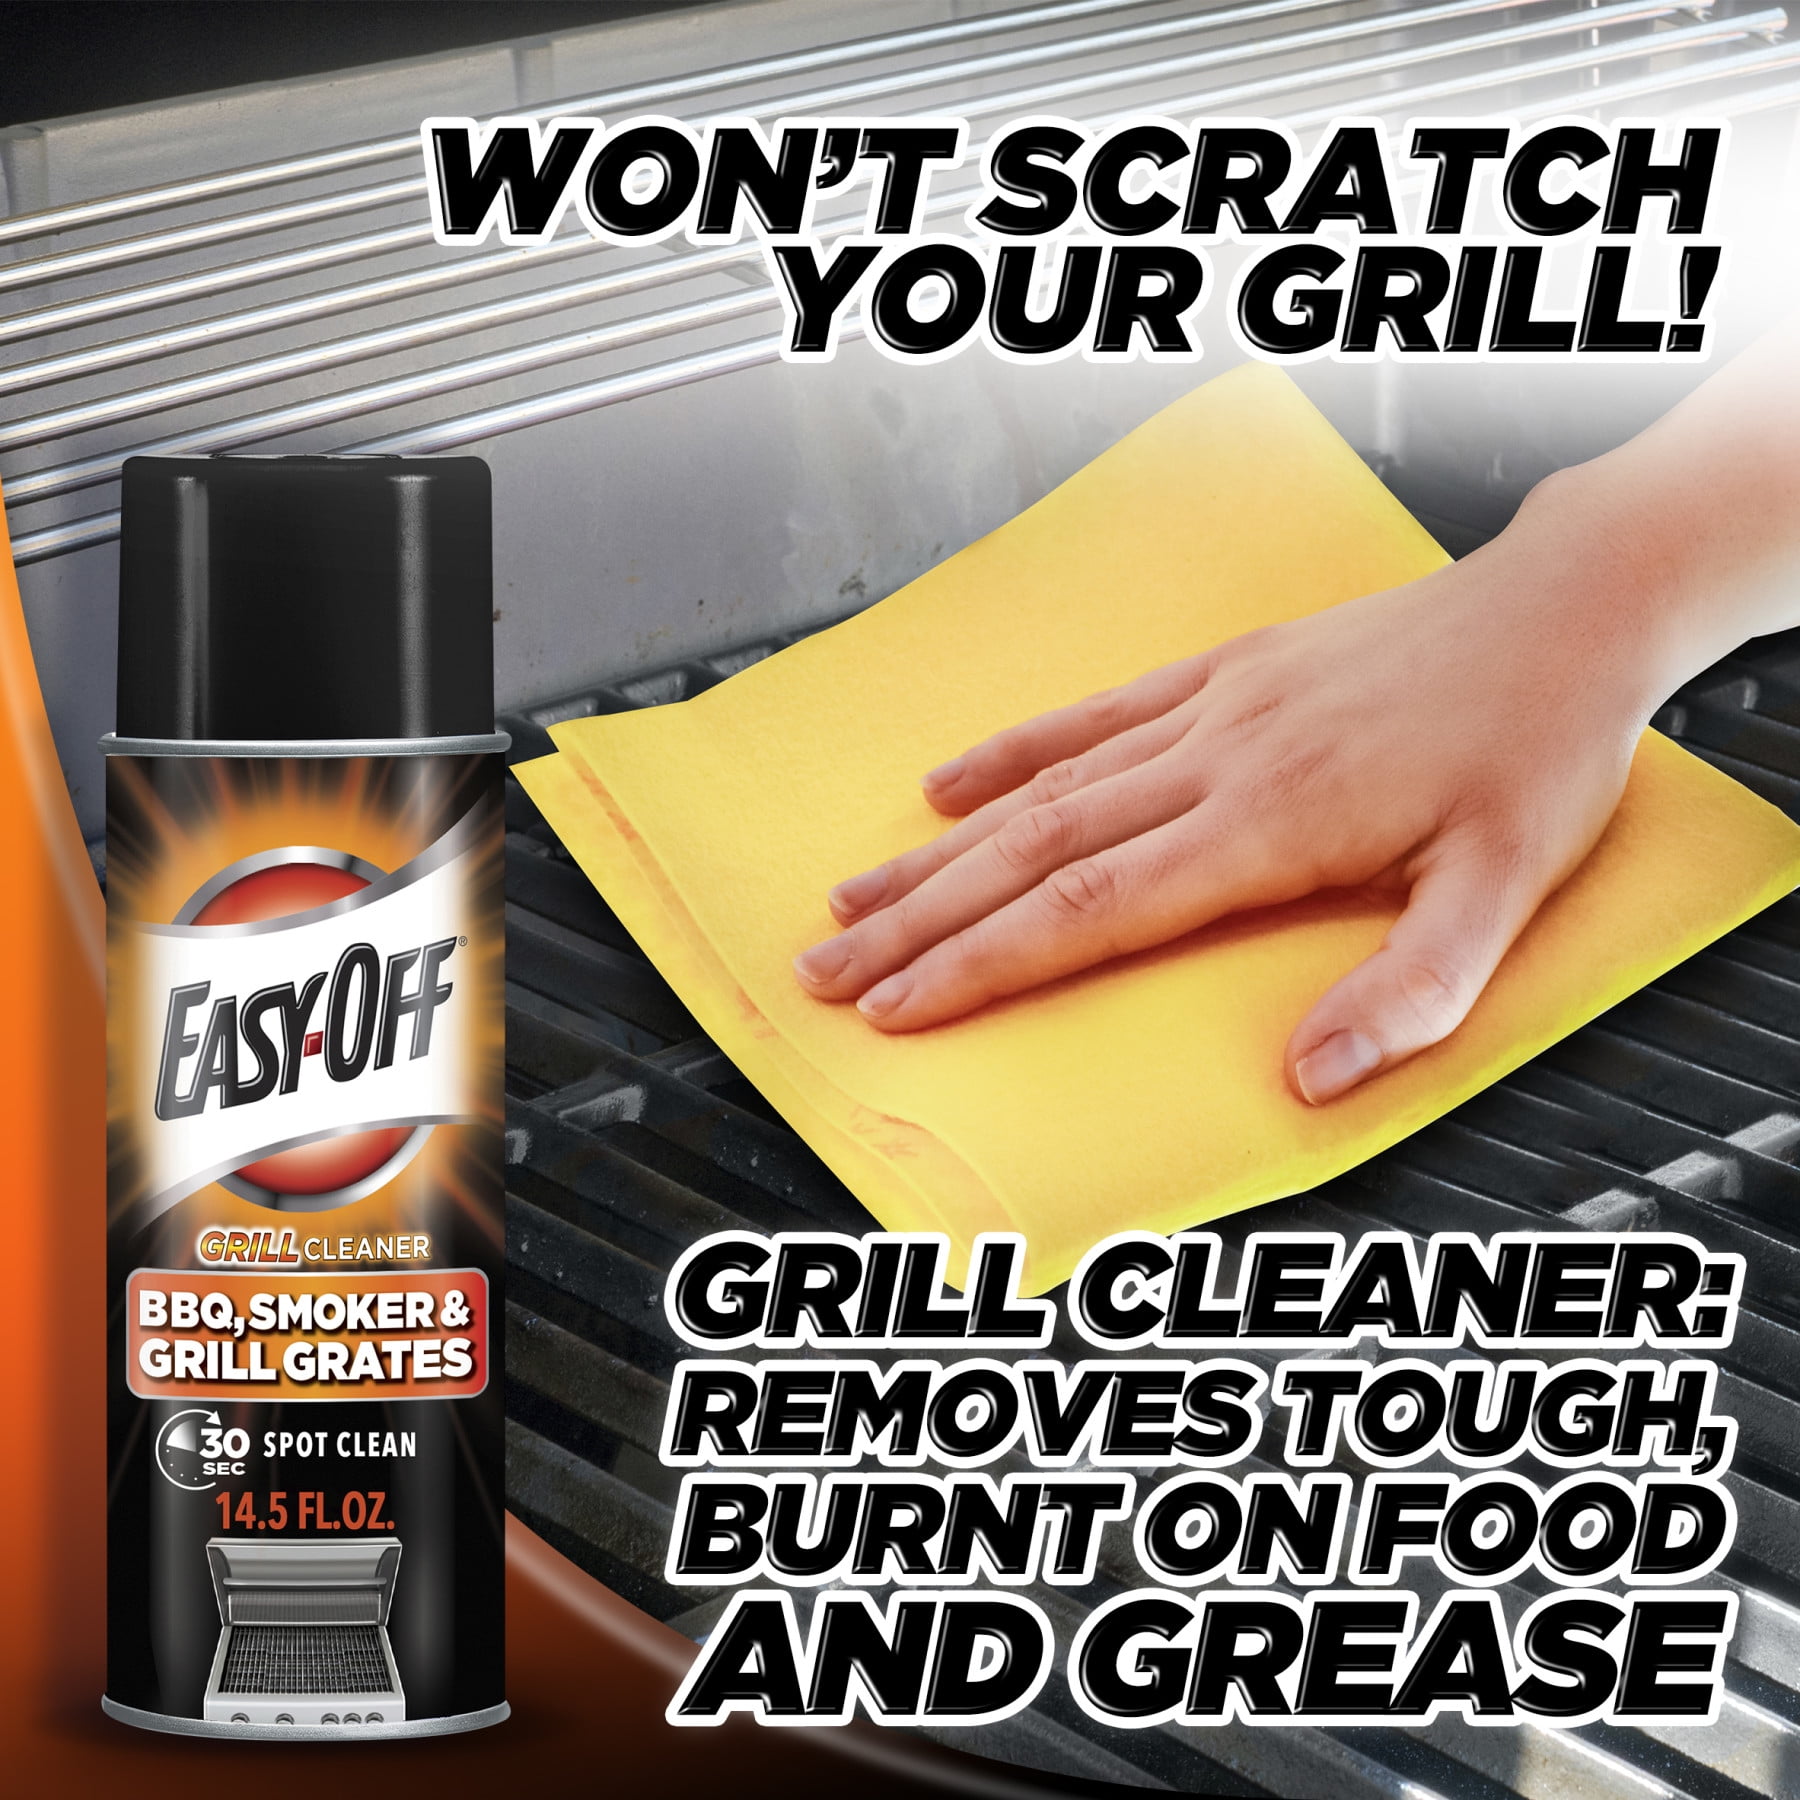 Chimisol Heavy-duty Grill Cleaner, 4 L